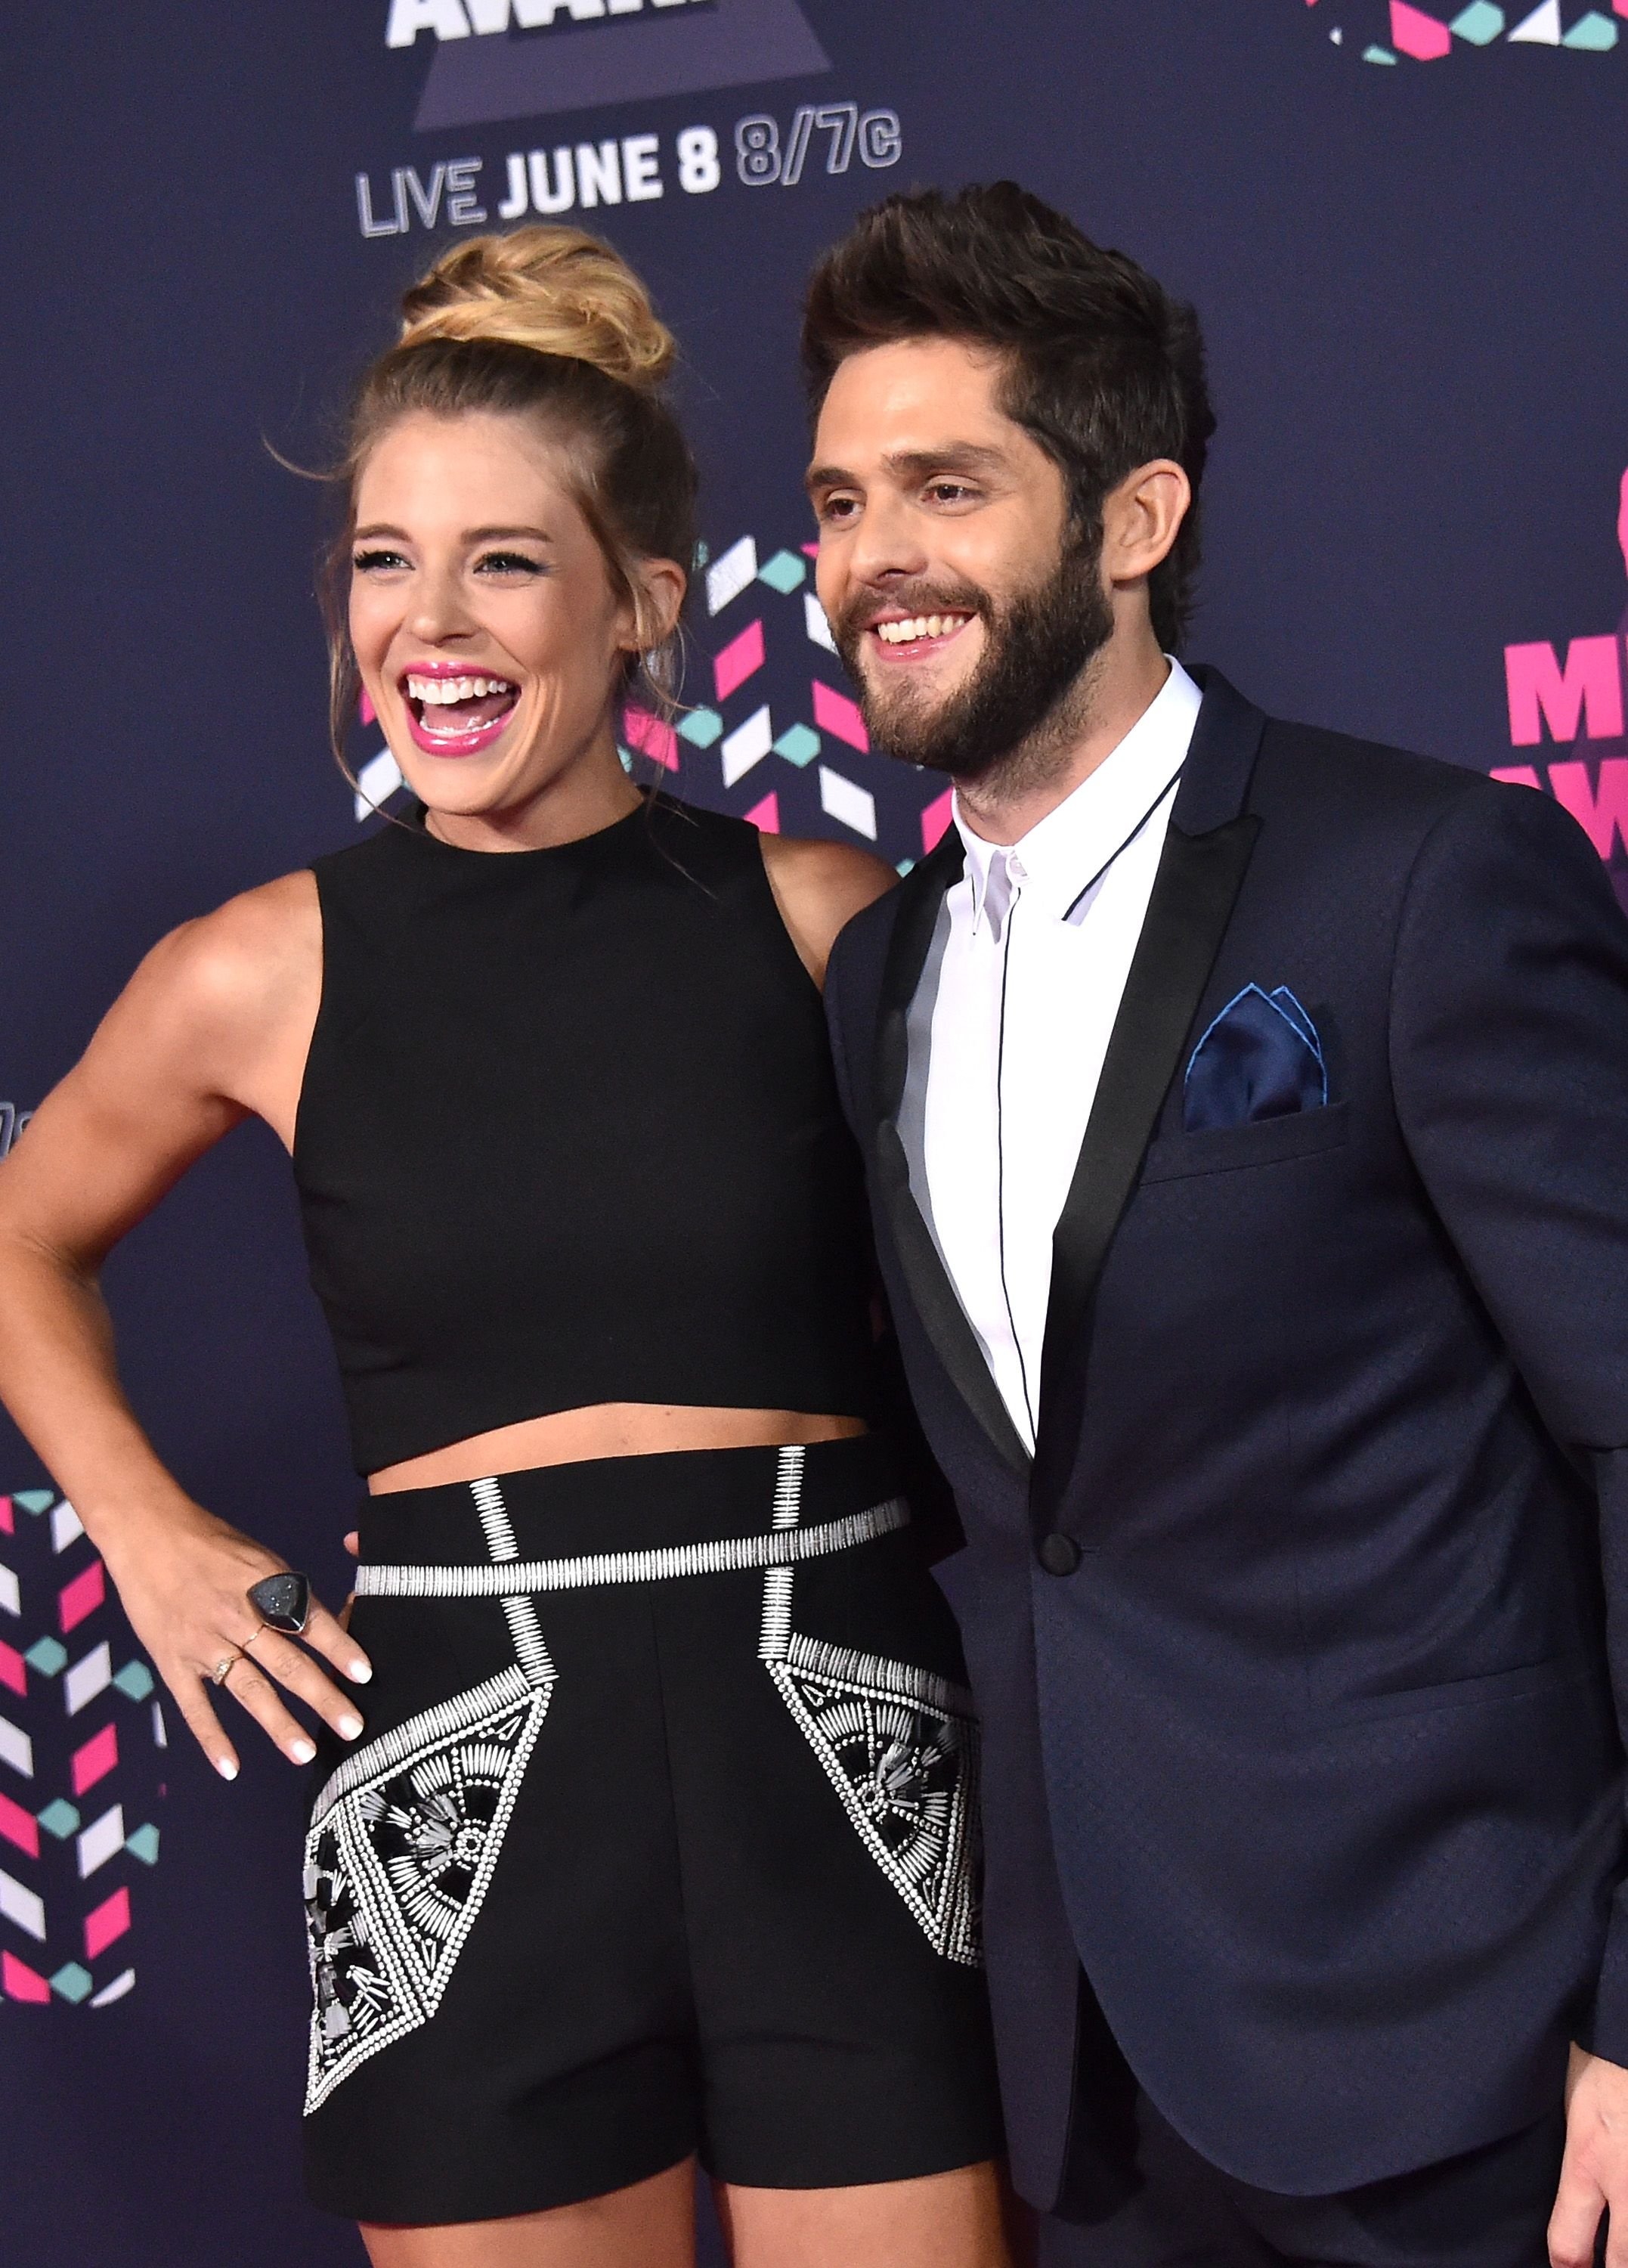 Thomas Rhett and wife Lauren Akins at the CMT Music Awards on June 8, 2016 | Photo: Getty Images